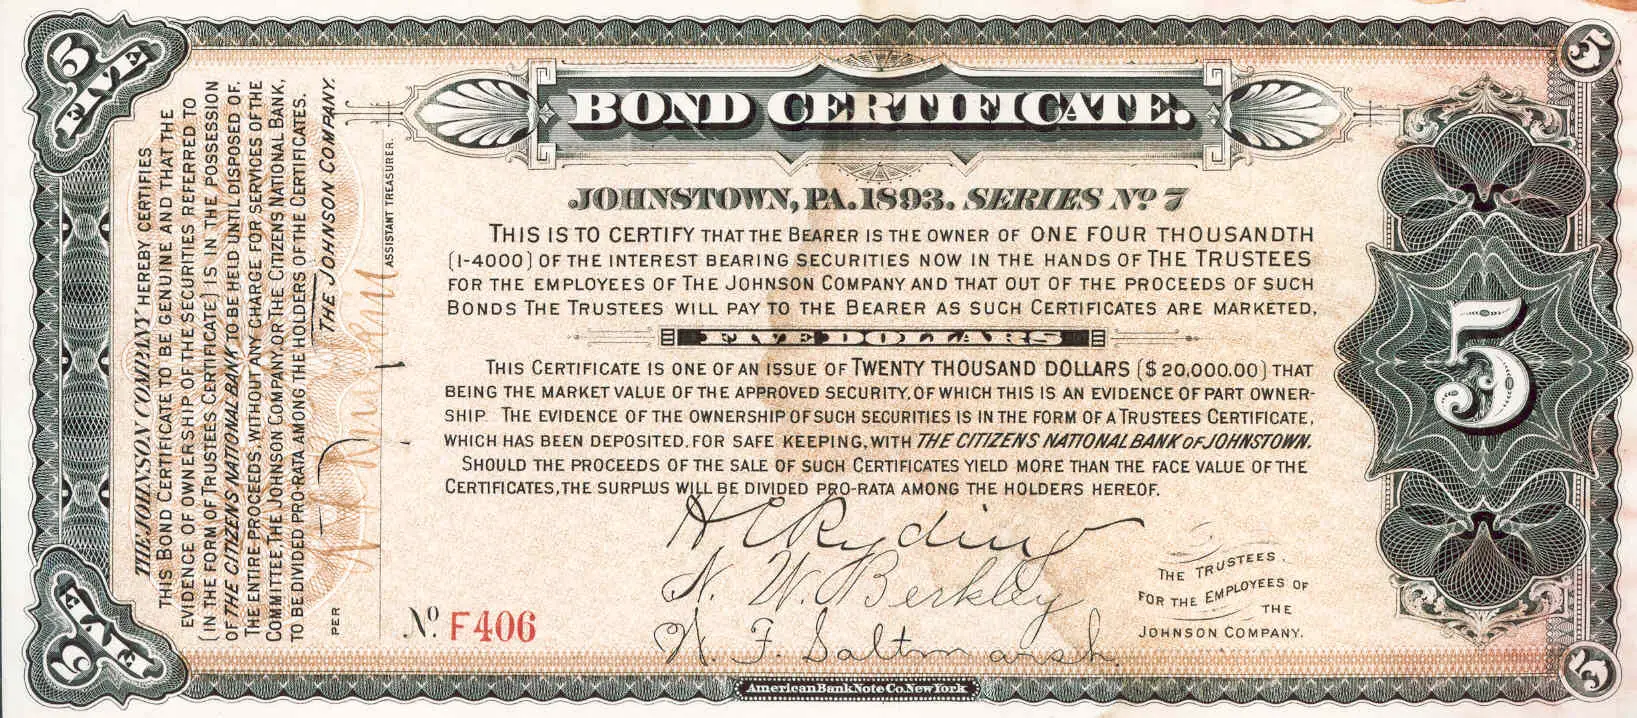 A Complete Beginners Guide to Understanding the Bond Market